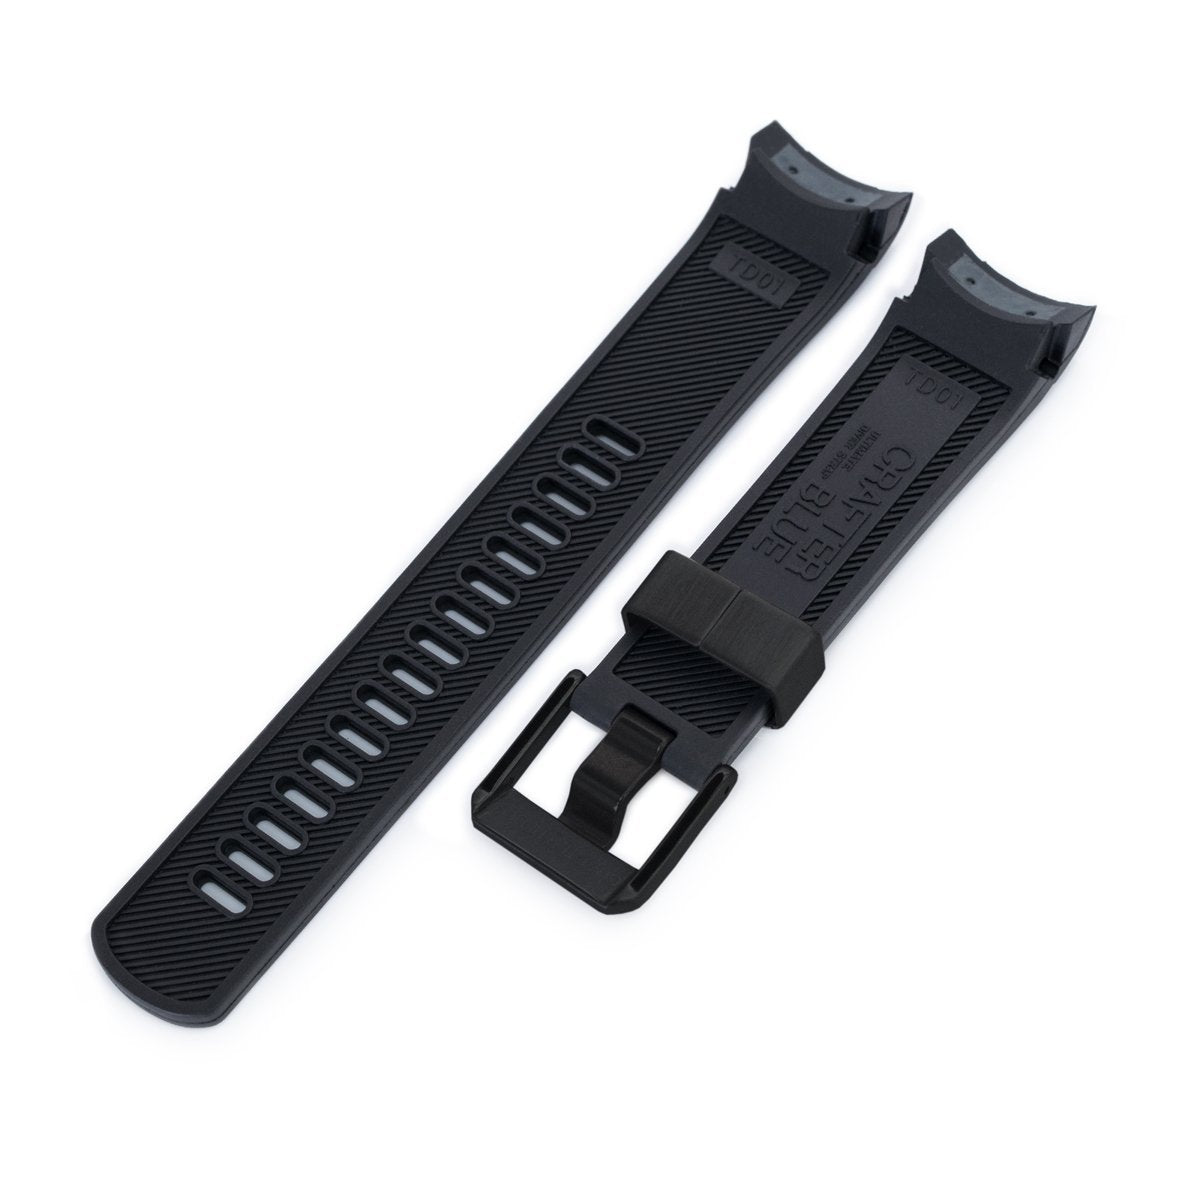 22mm Crafter Blue Black Rubber Curved Lug Watch Strap for TUD BB M79230 PVD Black Buckle Strapcode Watch Bands